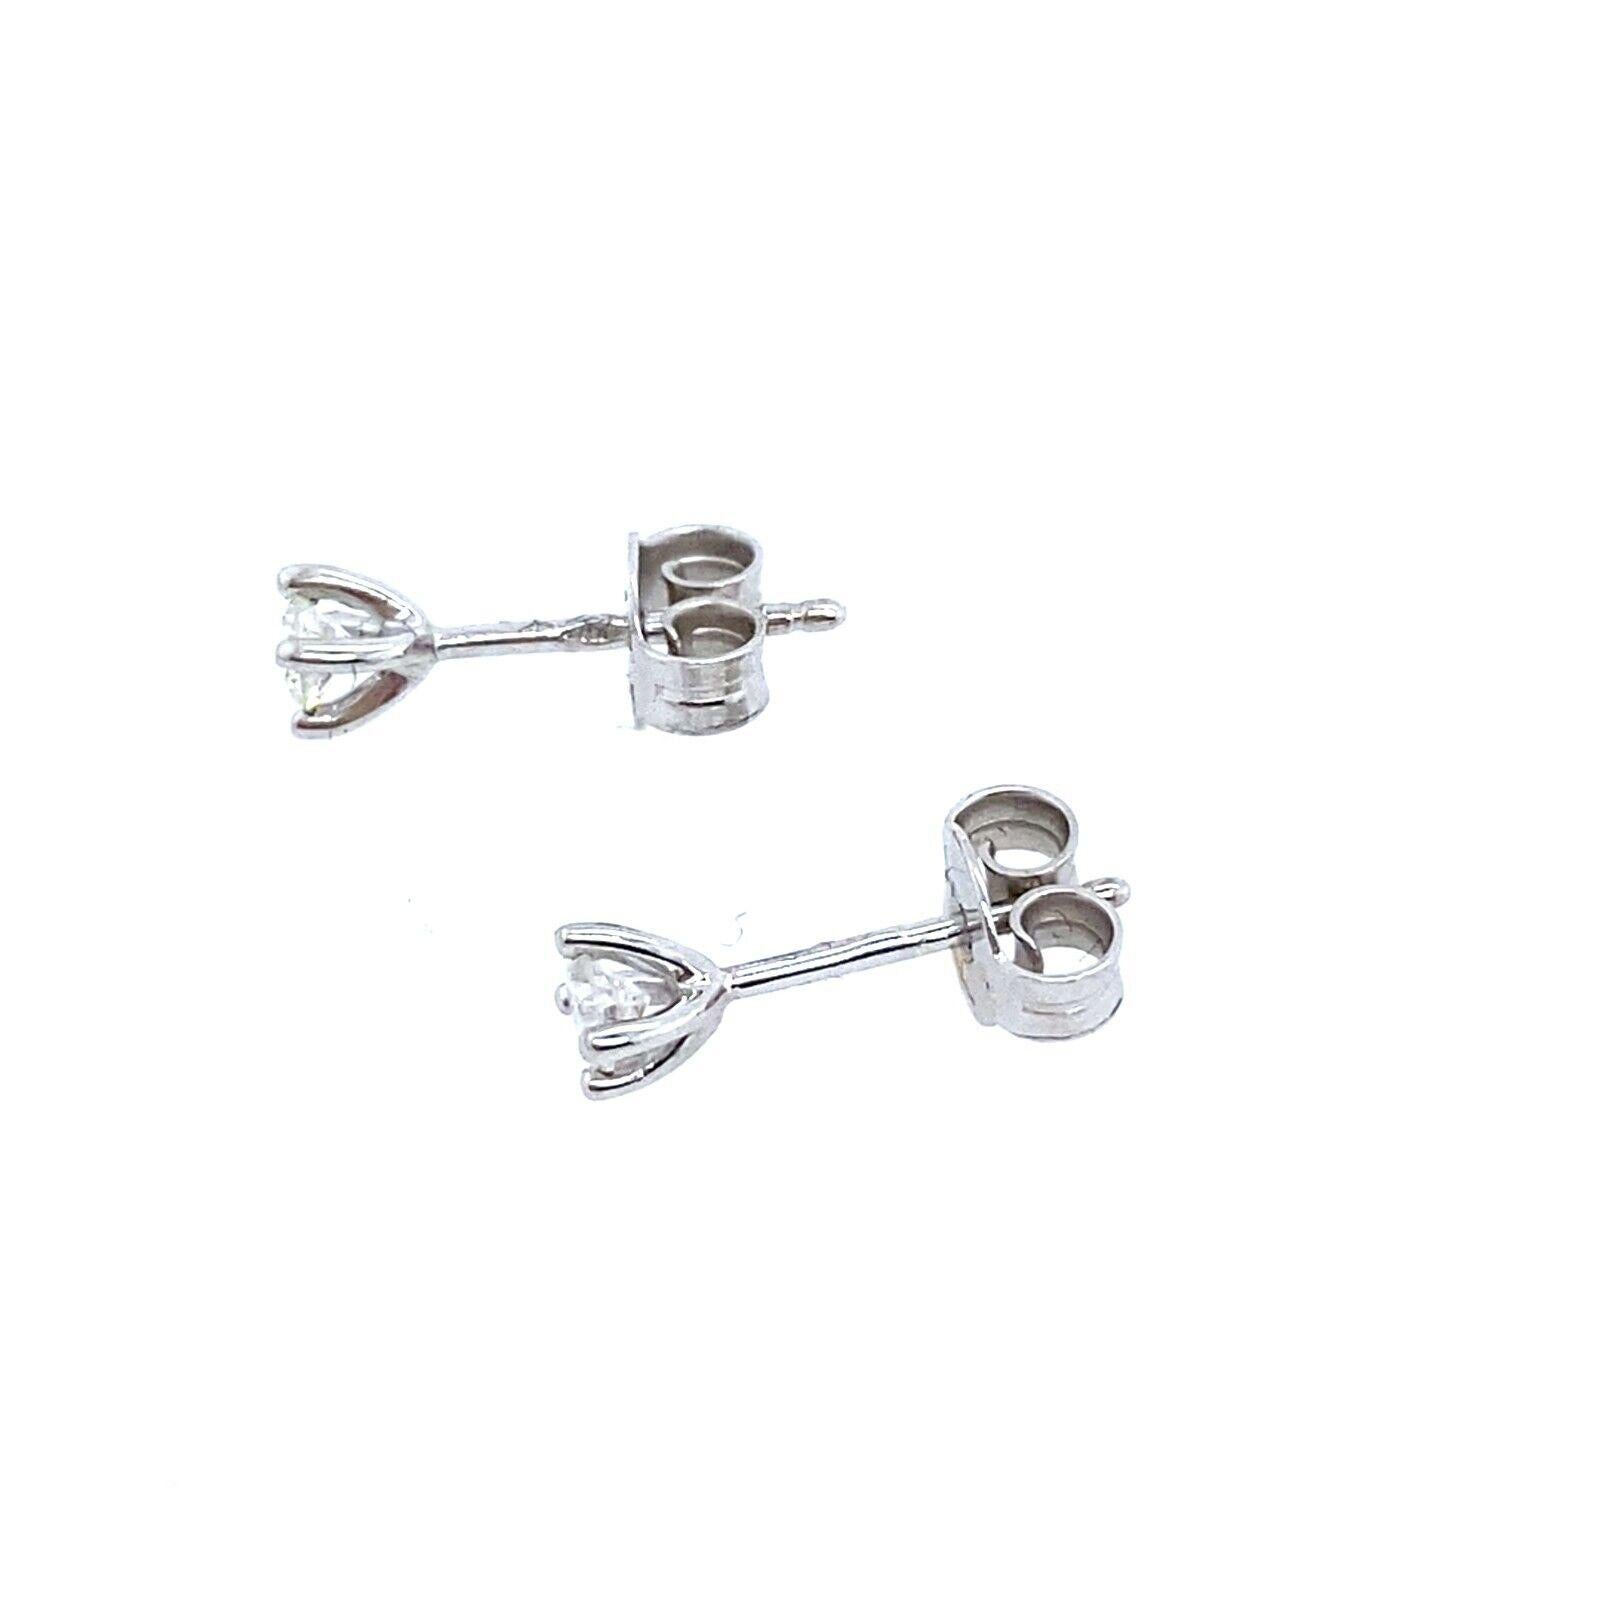 Round Cut Diamond Stud Earrings in 18ct White Gold, 0.35ct 